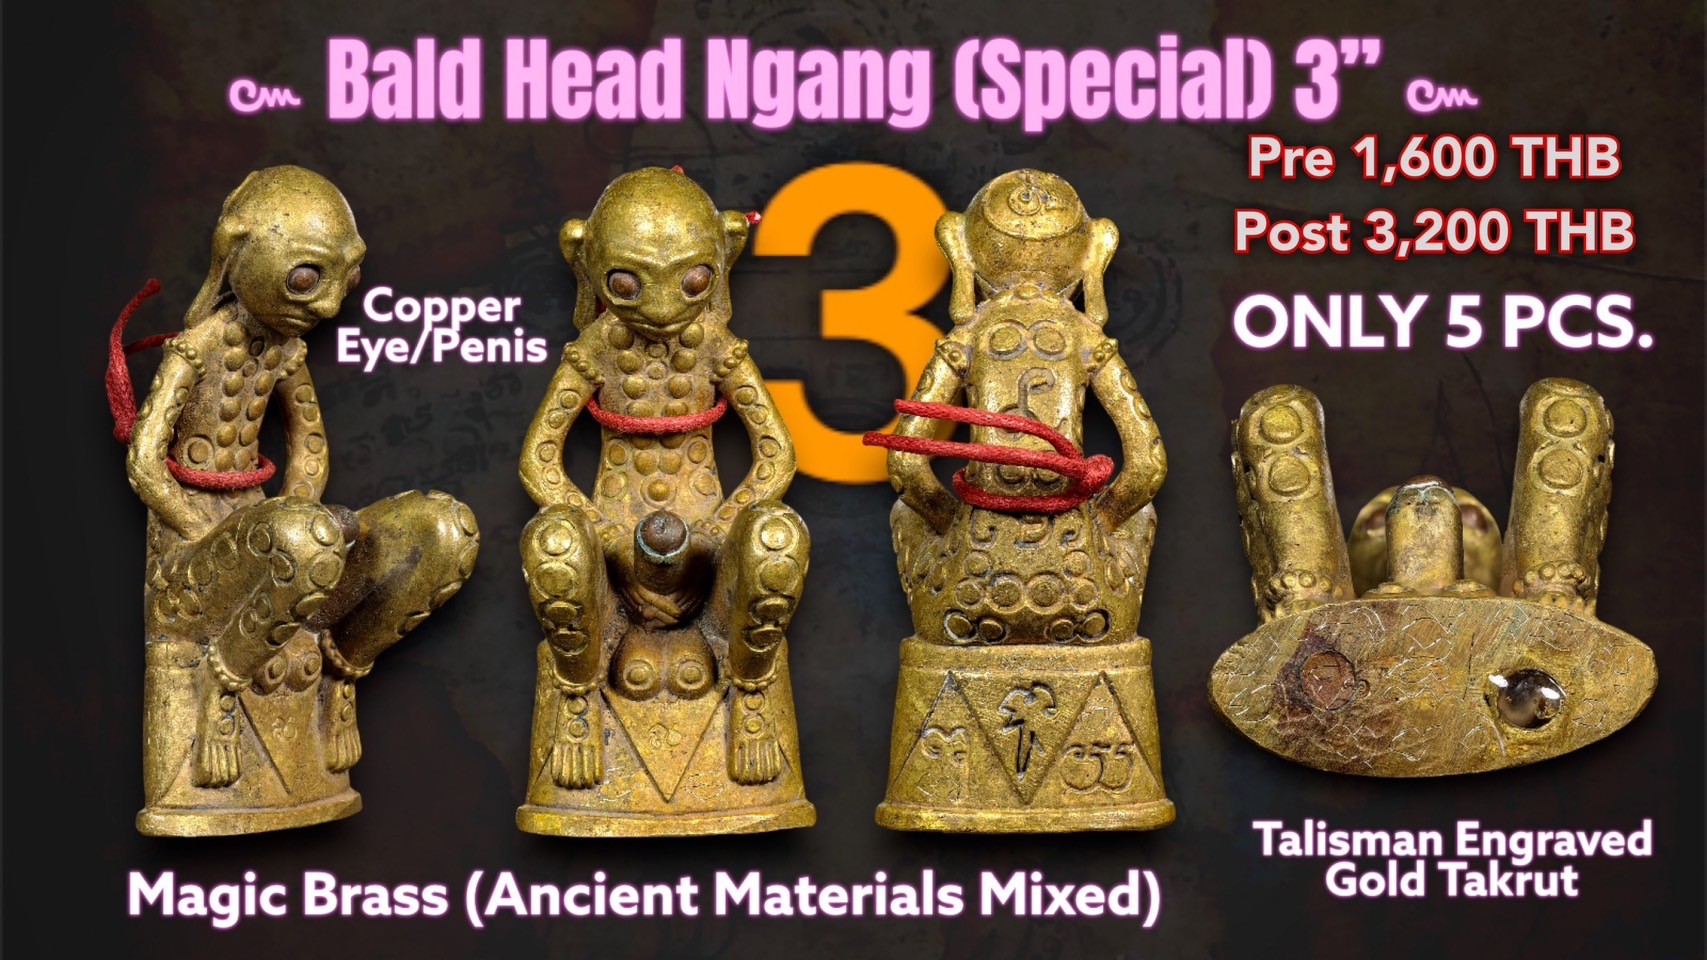 3.Bald Head Ngang SPECIAL Magic Brass (Ancient Mat.) Gold Takrut 3 inches